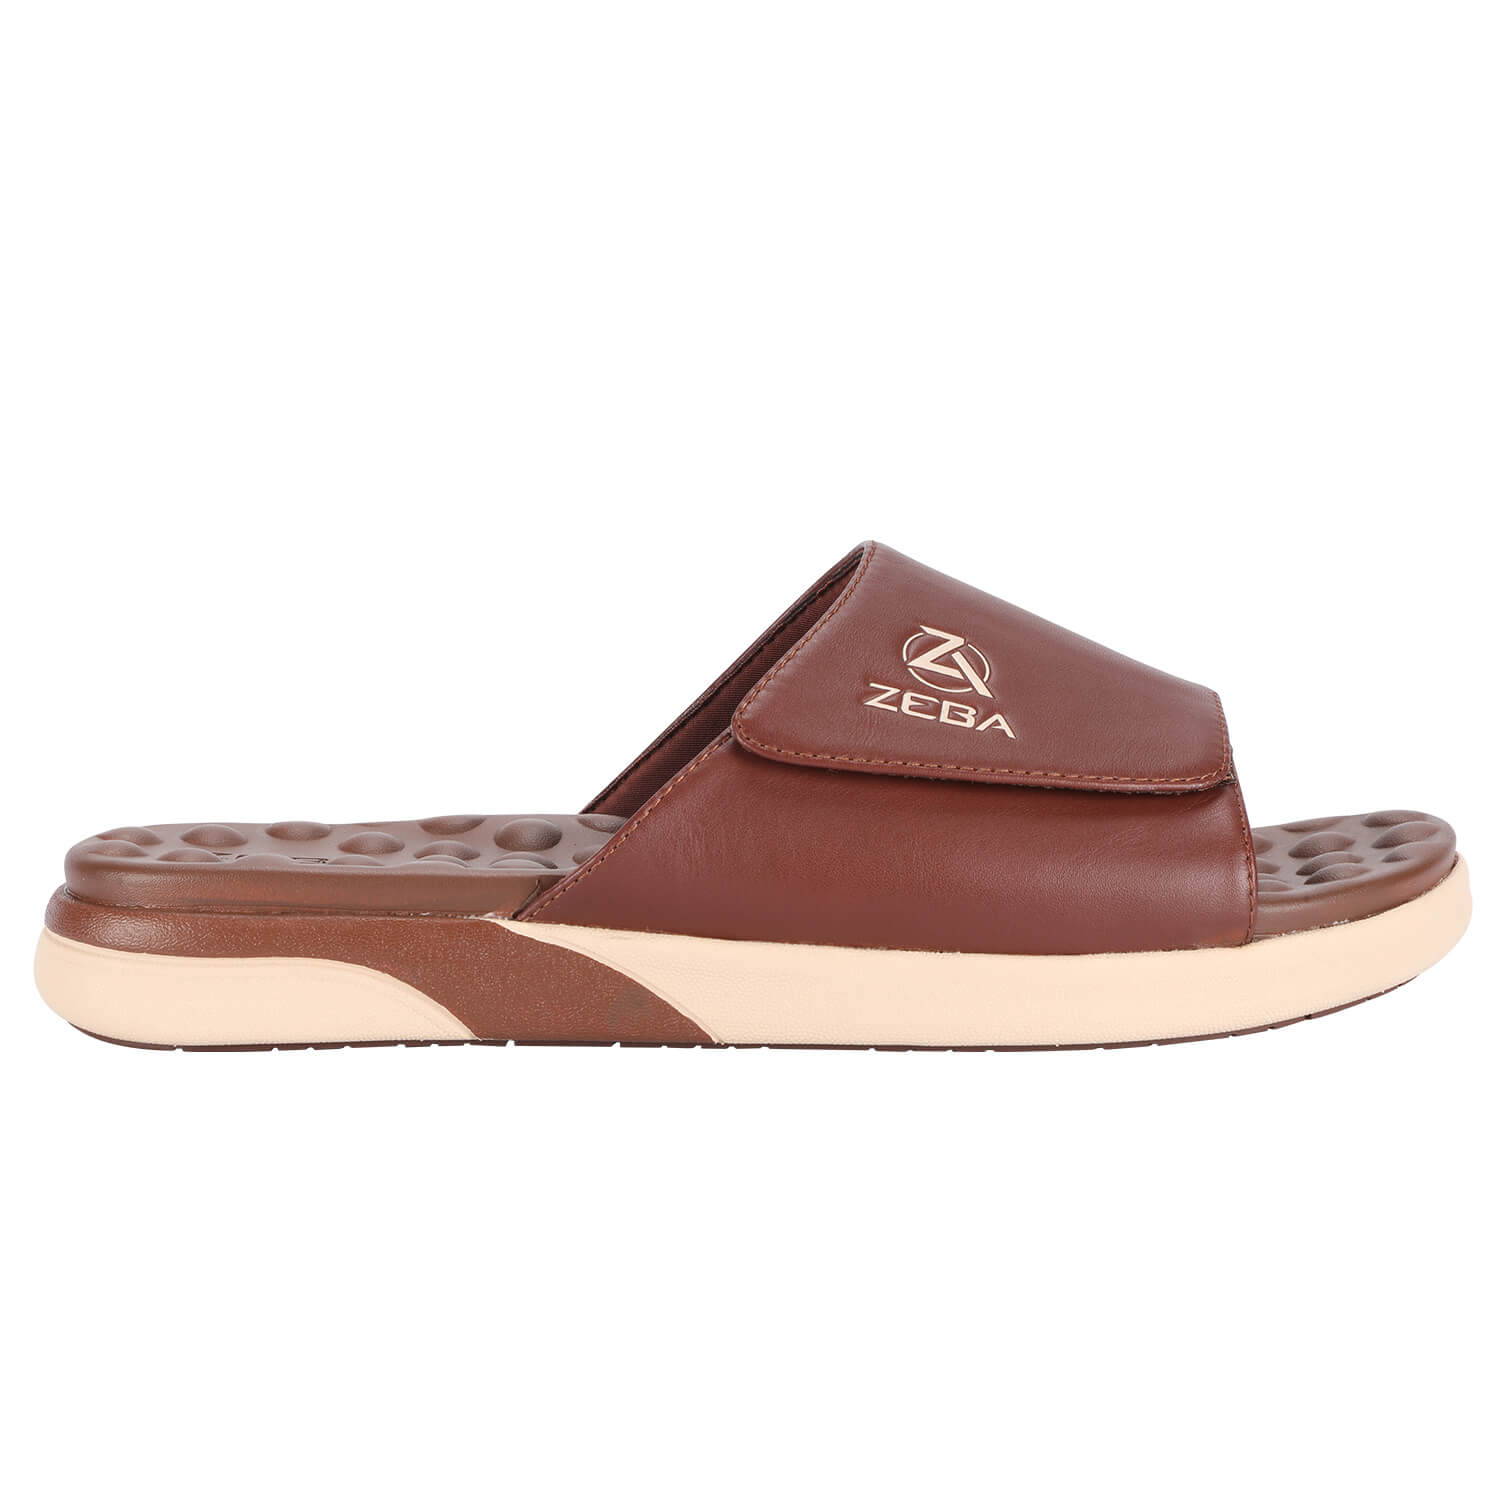 Brown Massaging Leather Sandals With Strap (Sizes 7-16 Available